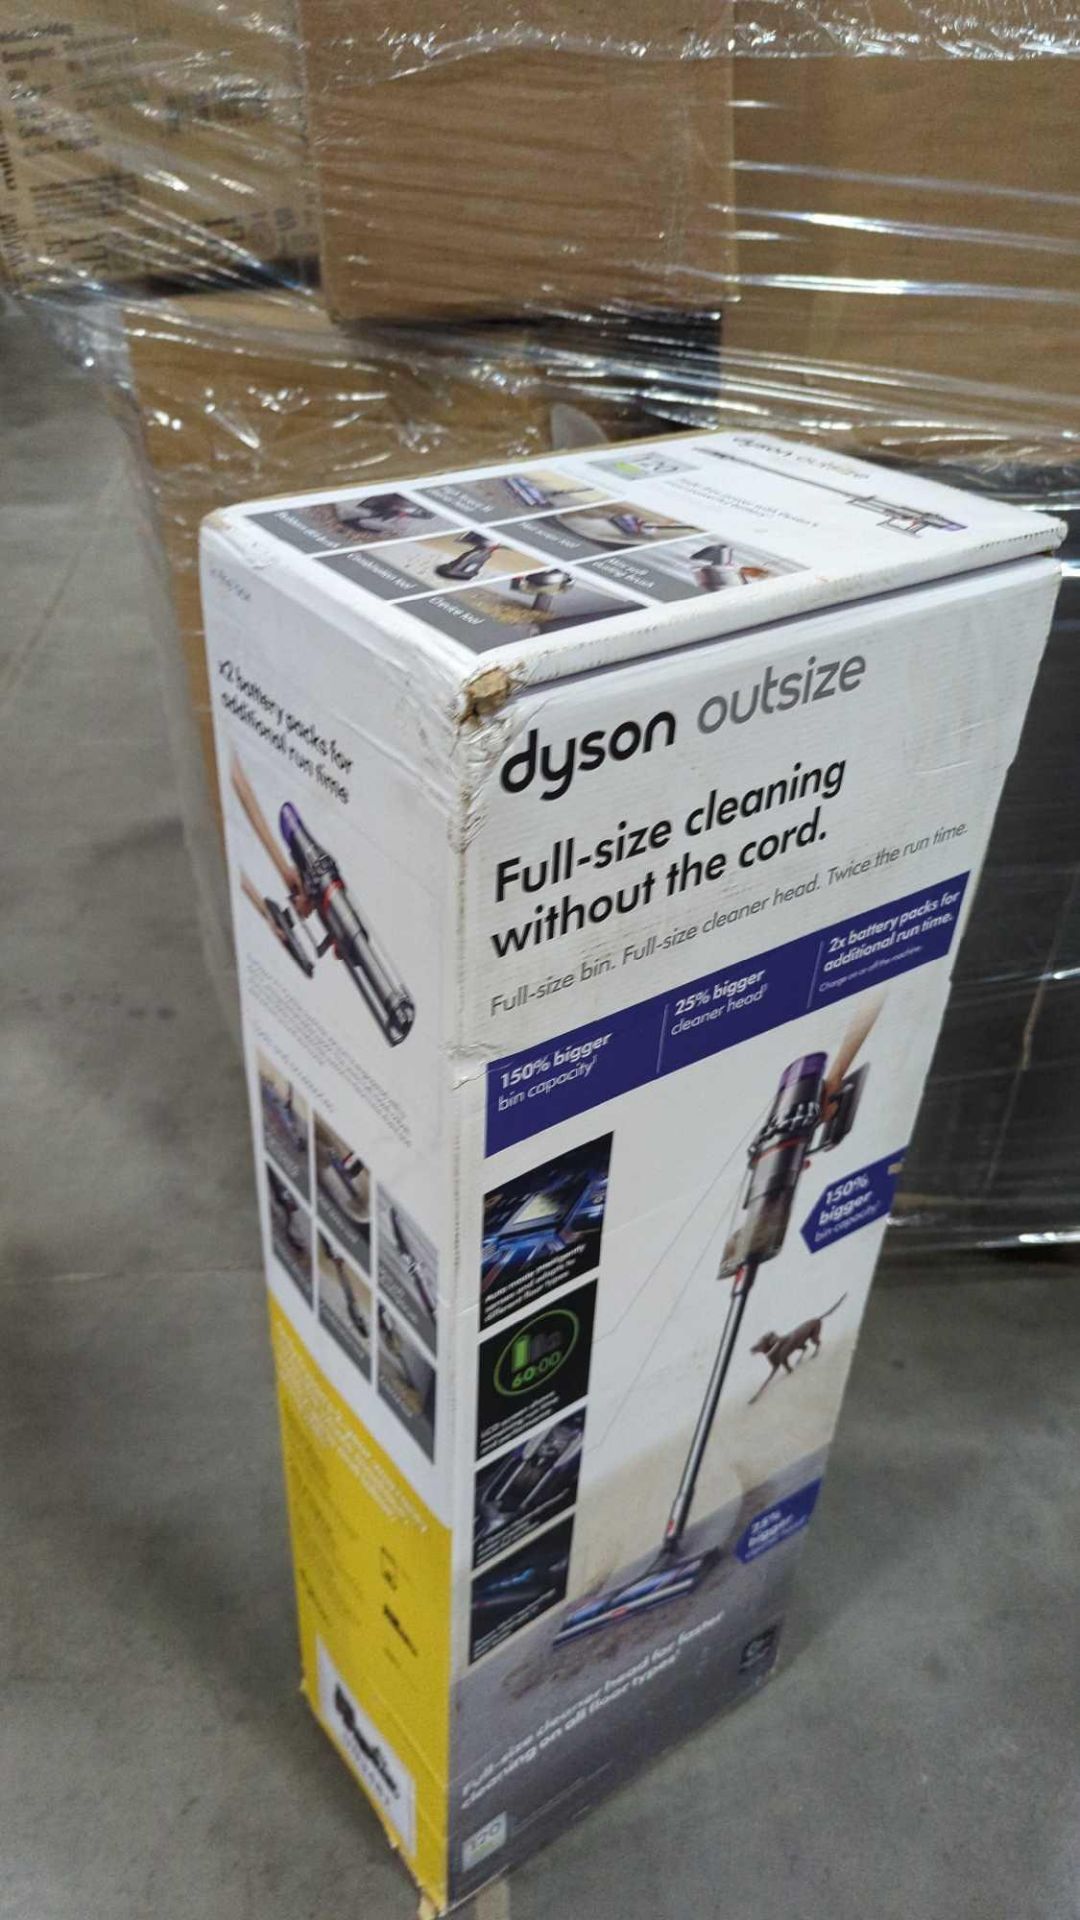 Dyson Outsize, and more - Image 11 of 20